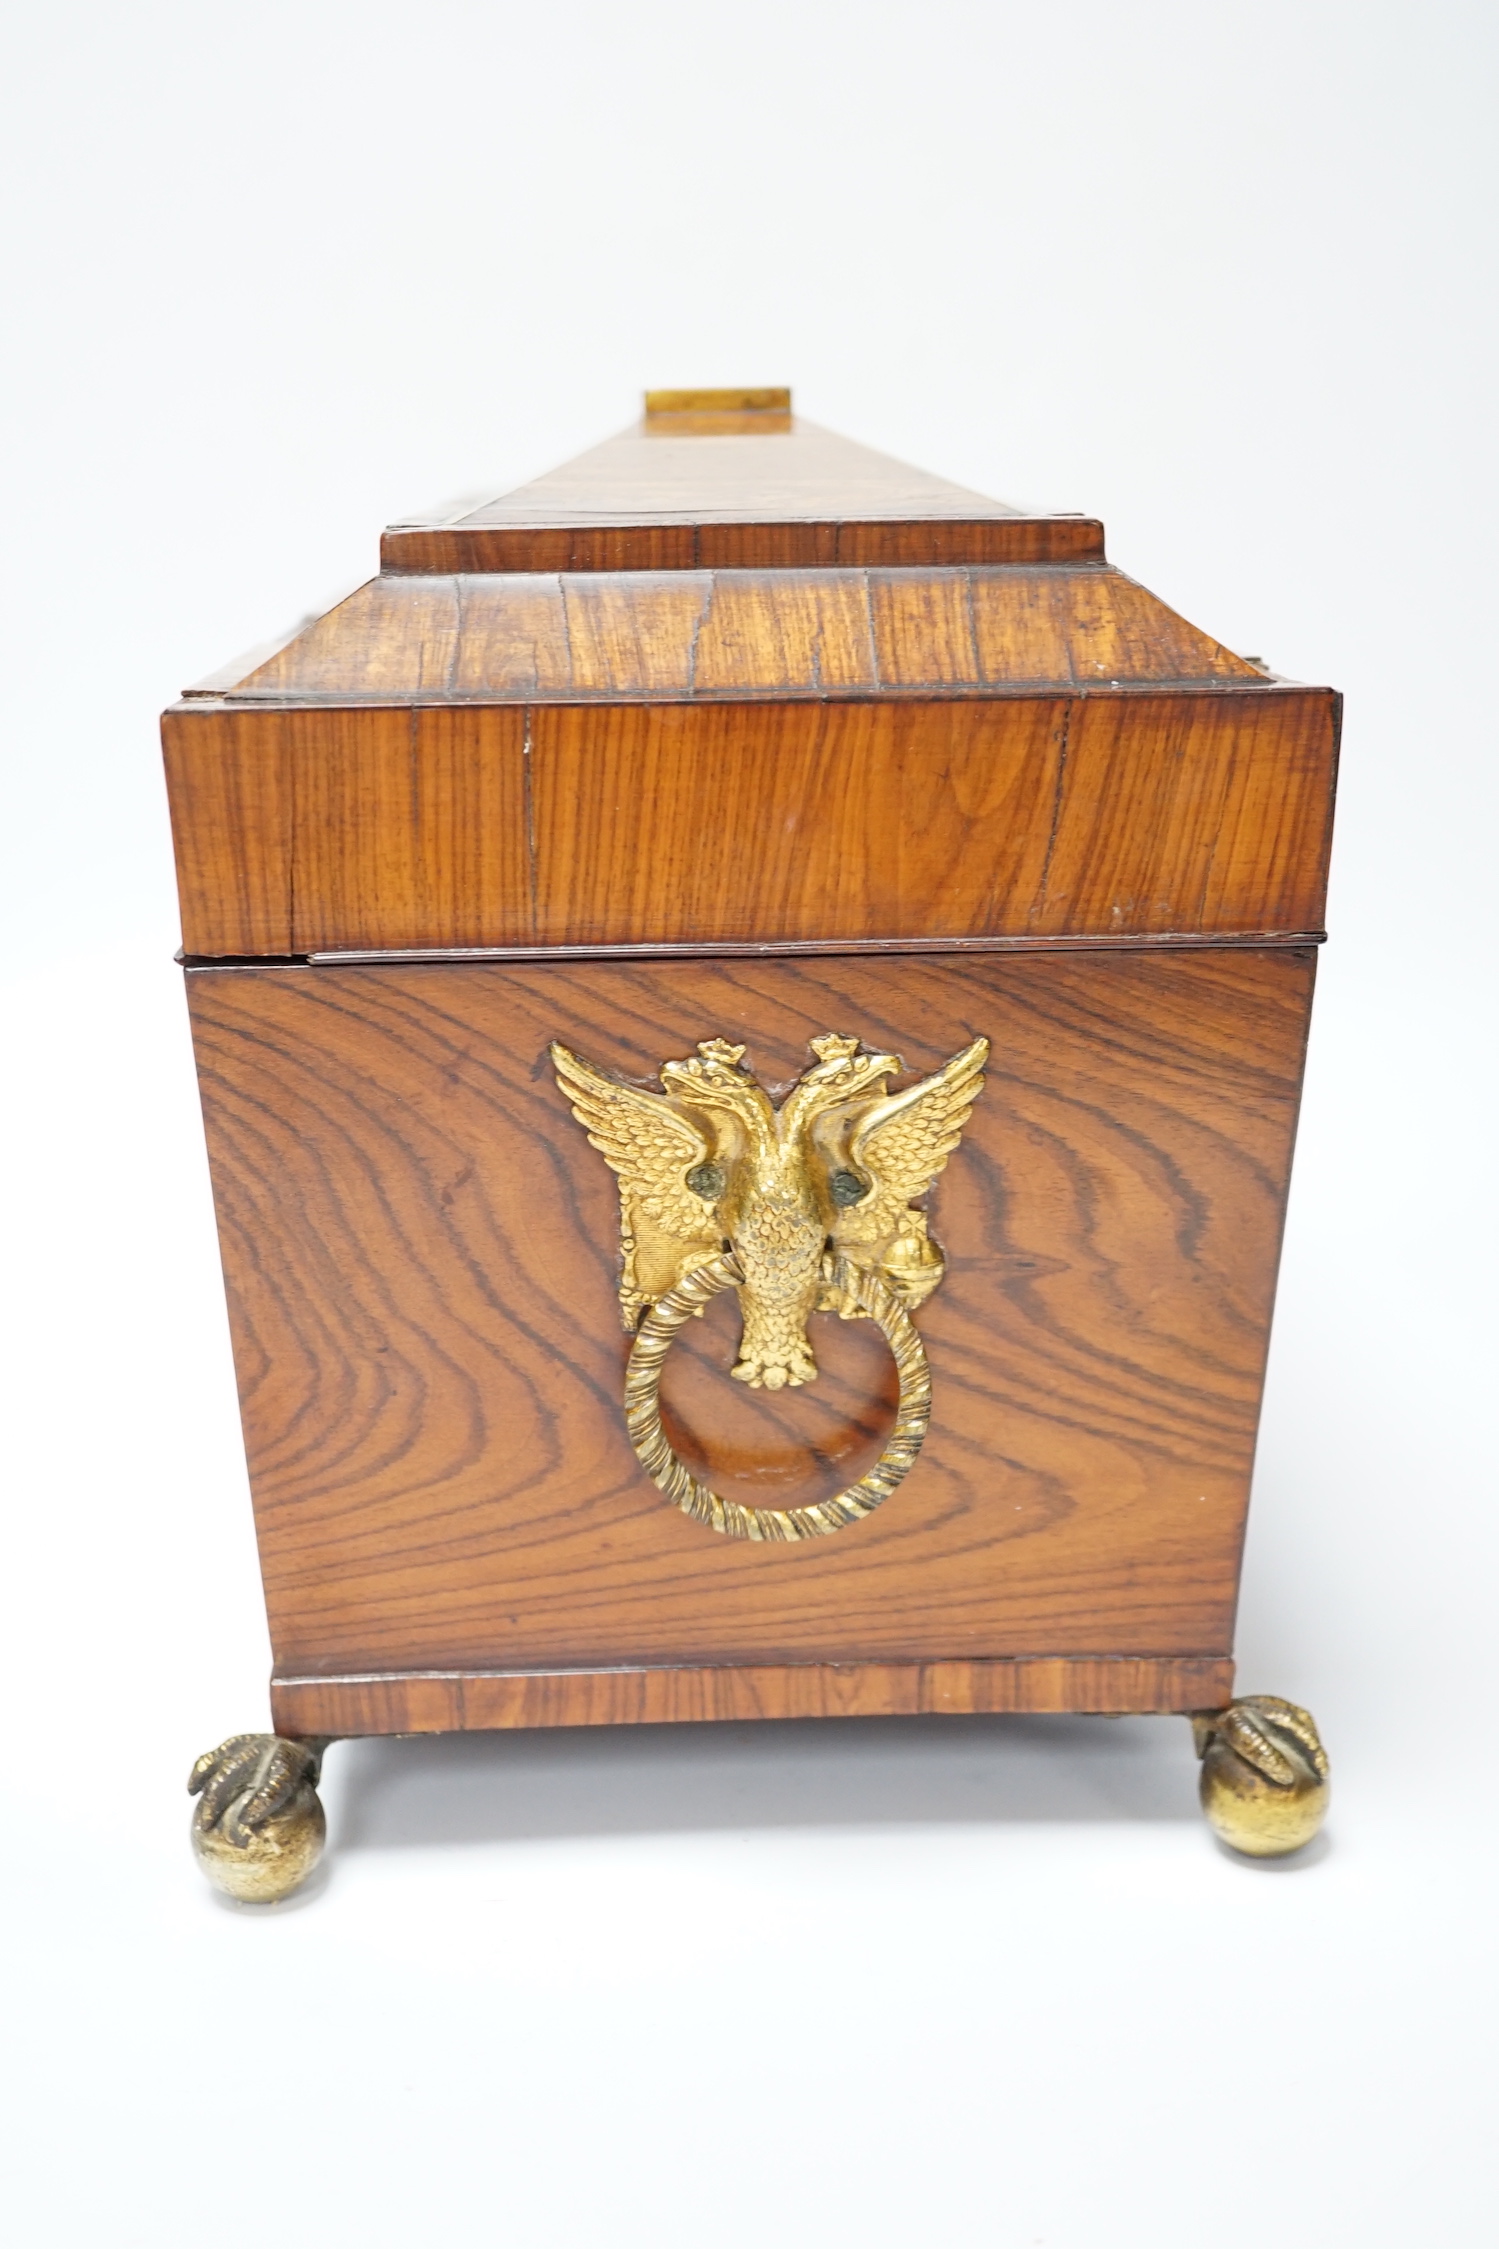 A Regency kingwood and brass strung sarcophagus tea caddy, manufacturers label for Staudenmeyer, 30 Cockspur Street, Charing Cross, London, double headed eagle handles, 21.5cm high, 30.5cm wide, 15cm deep